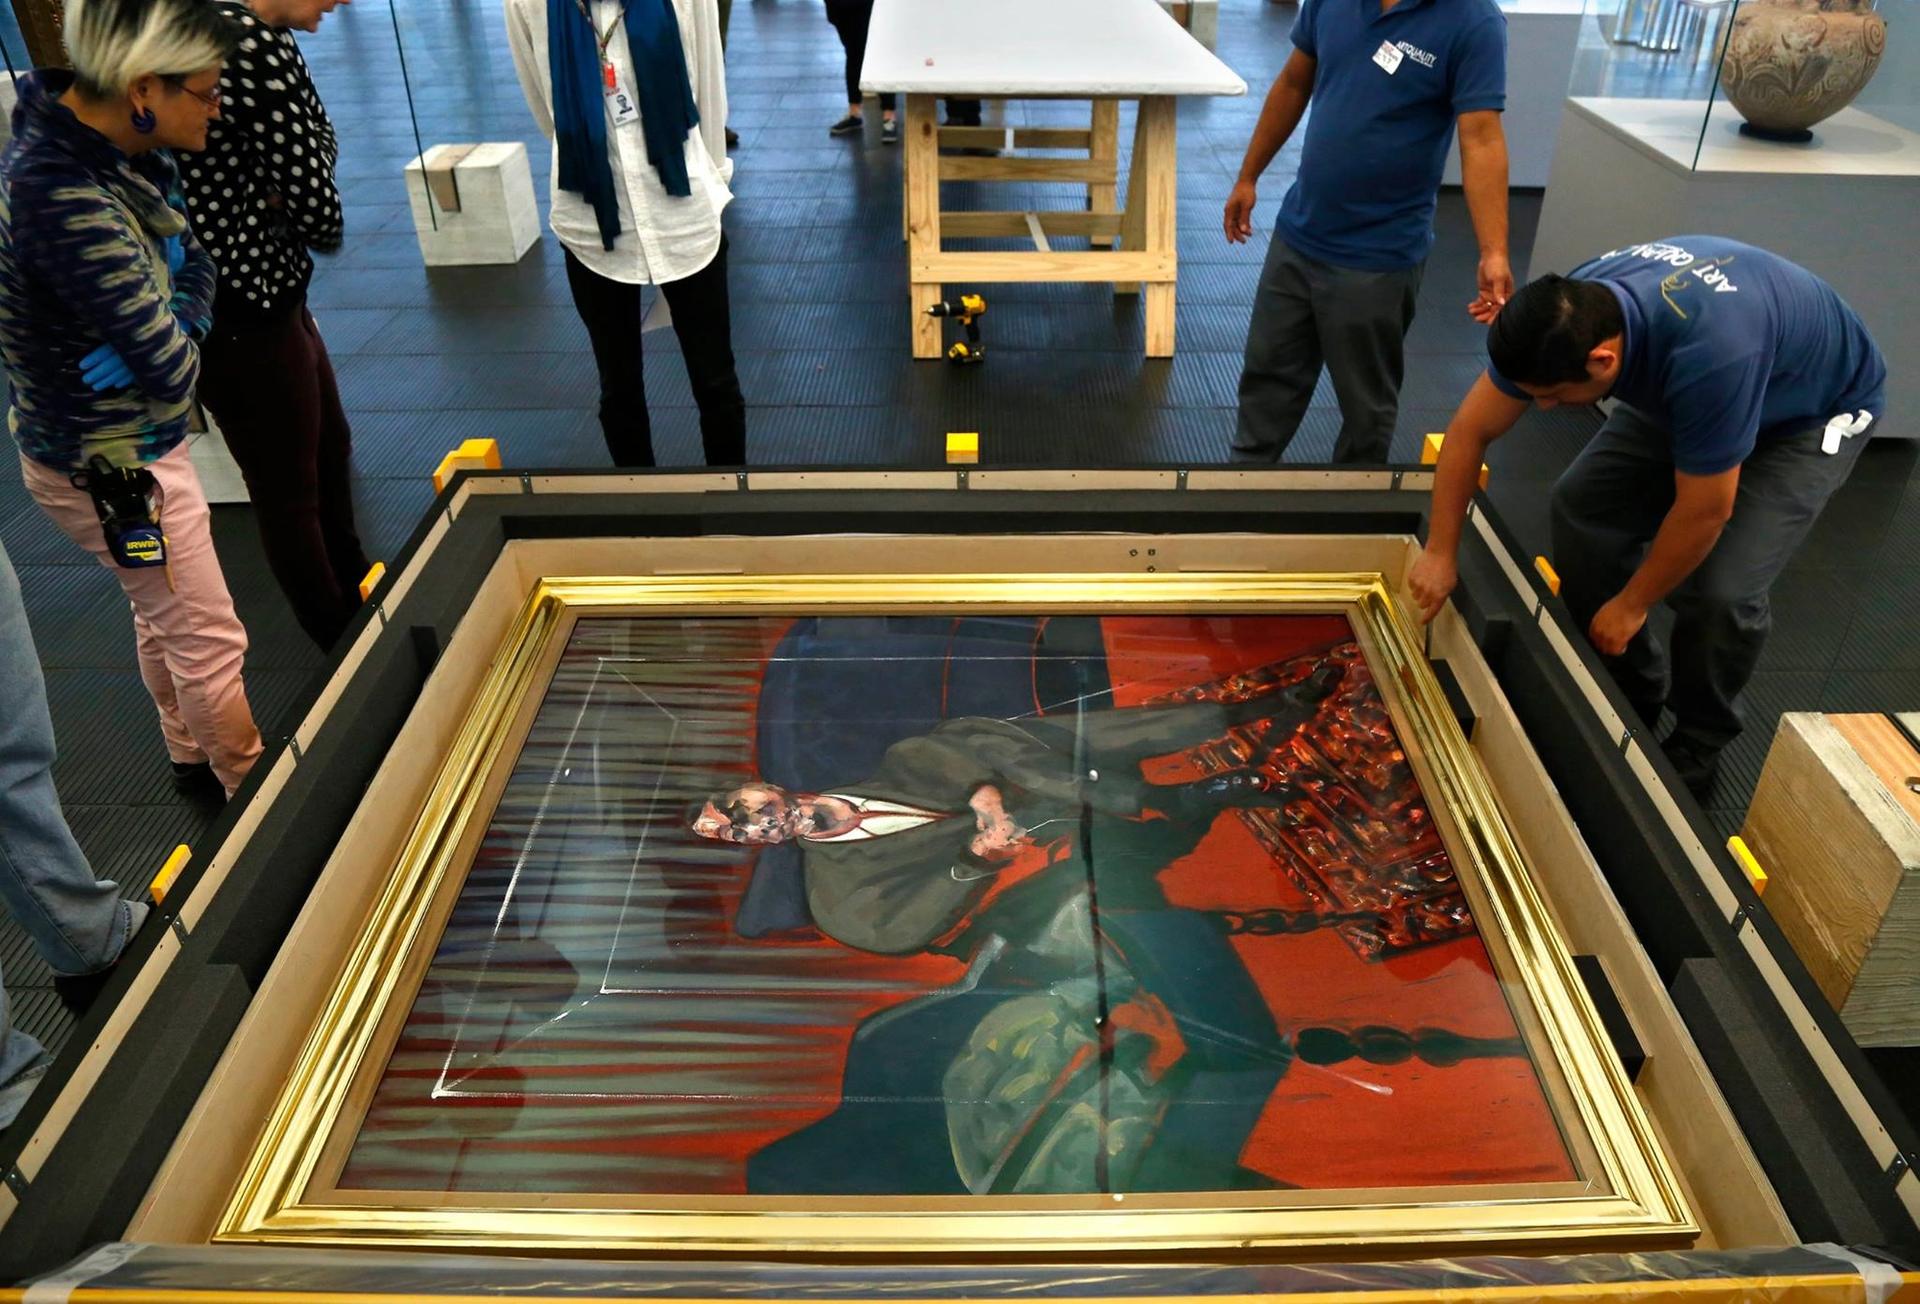 Handler unpack Francis Bacon's Seated Figure (1961) at Masp, on loan from Tate, London The Estate of Francis Bacon. All rights reserved. DACS, London/ AUTVIS, Brasil, 2018